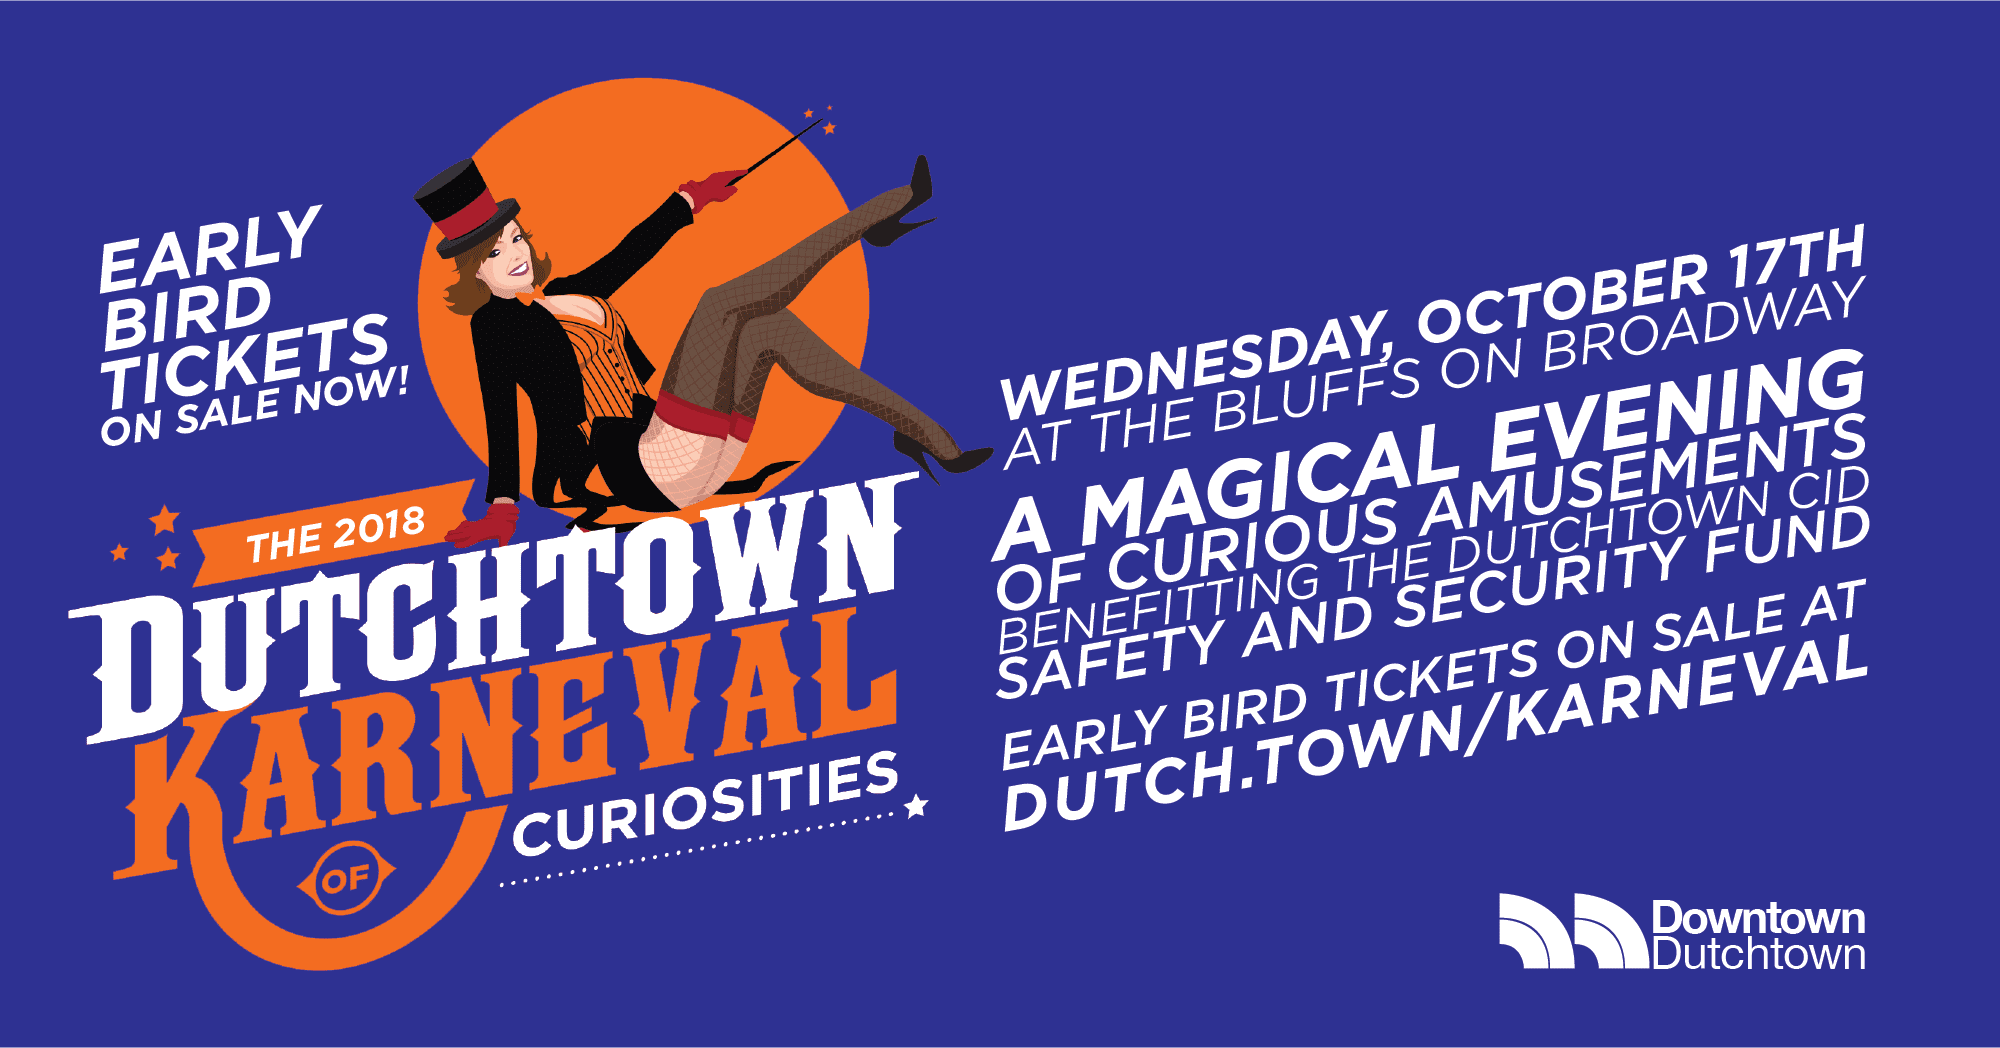 Early Bird tickets now on sale for the 2018 Dutchtown Karneval of Curiosities!